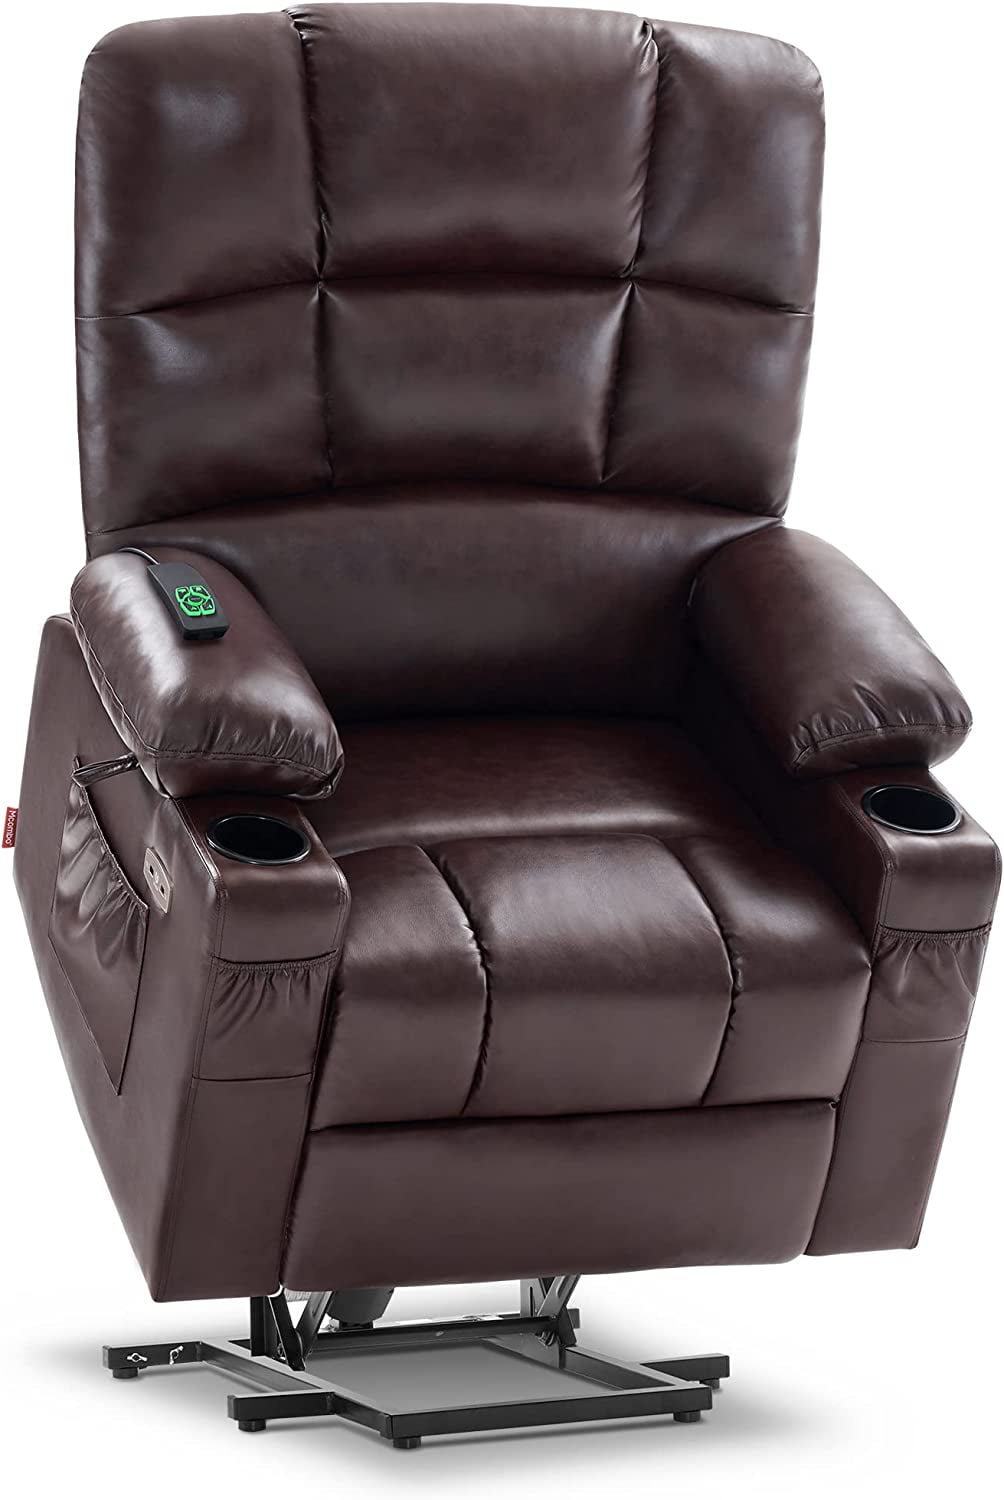 Features and Benefits of Medical Recliners